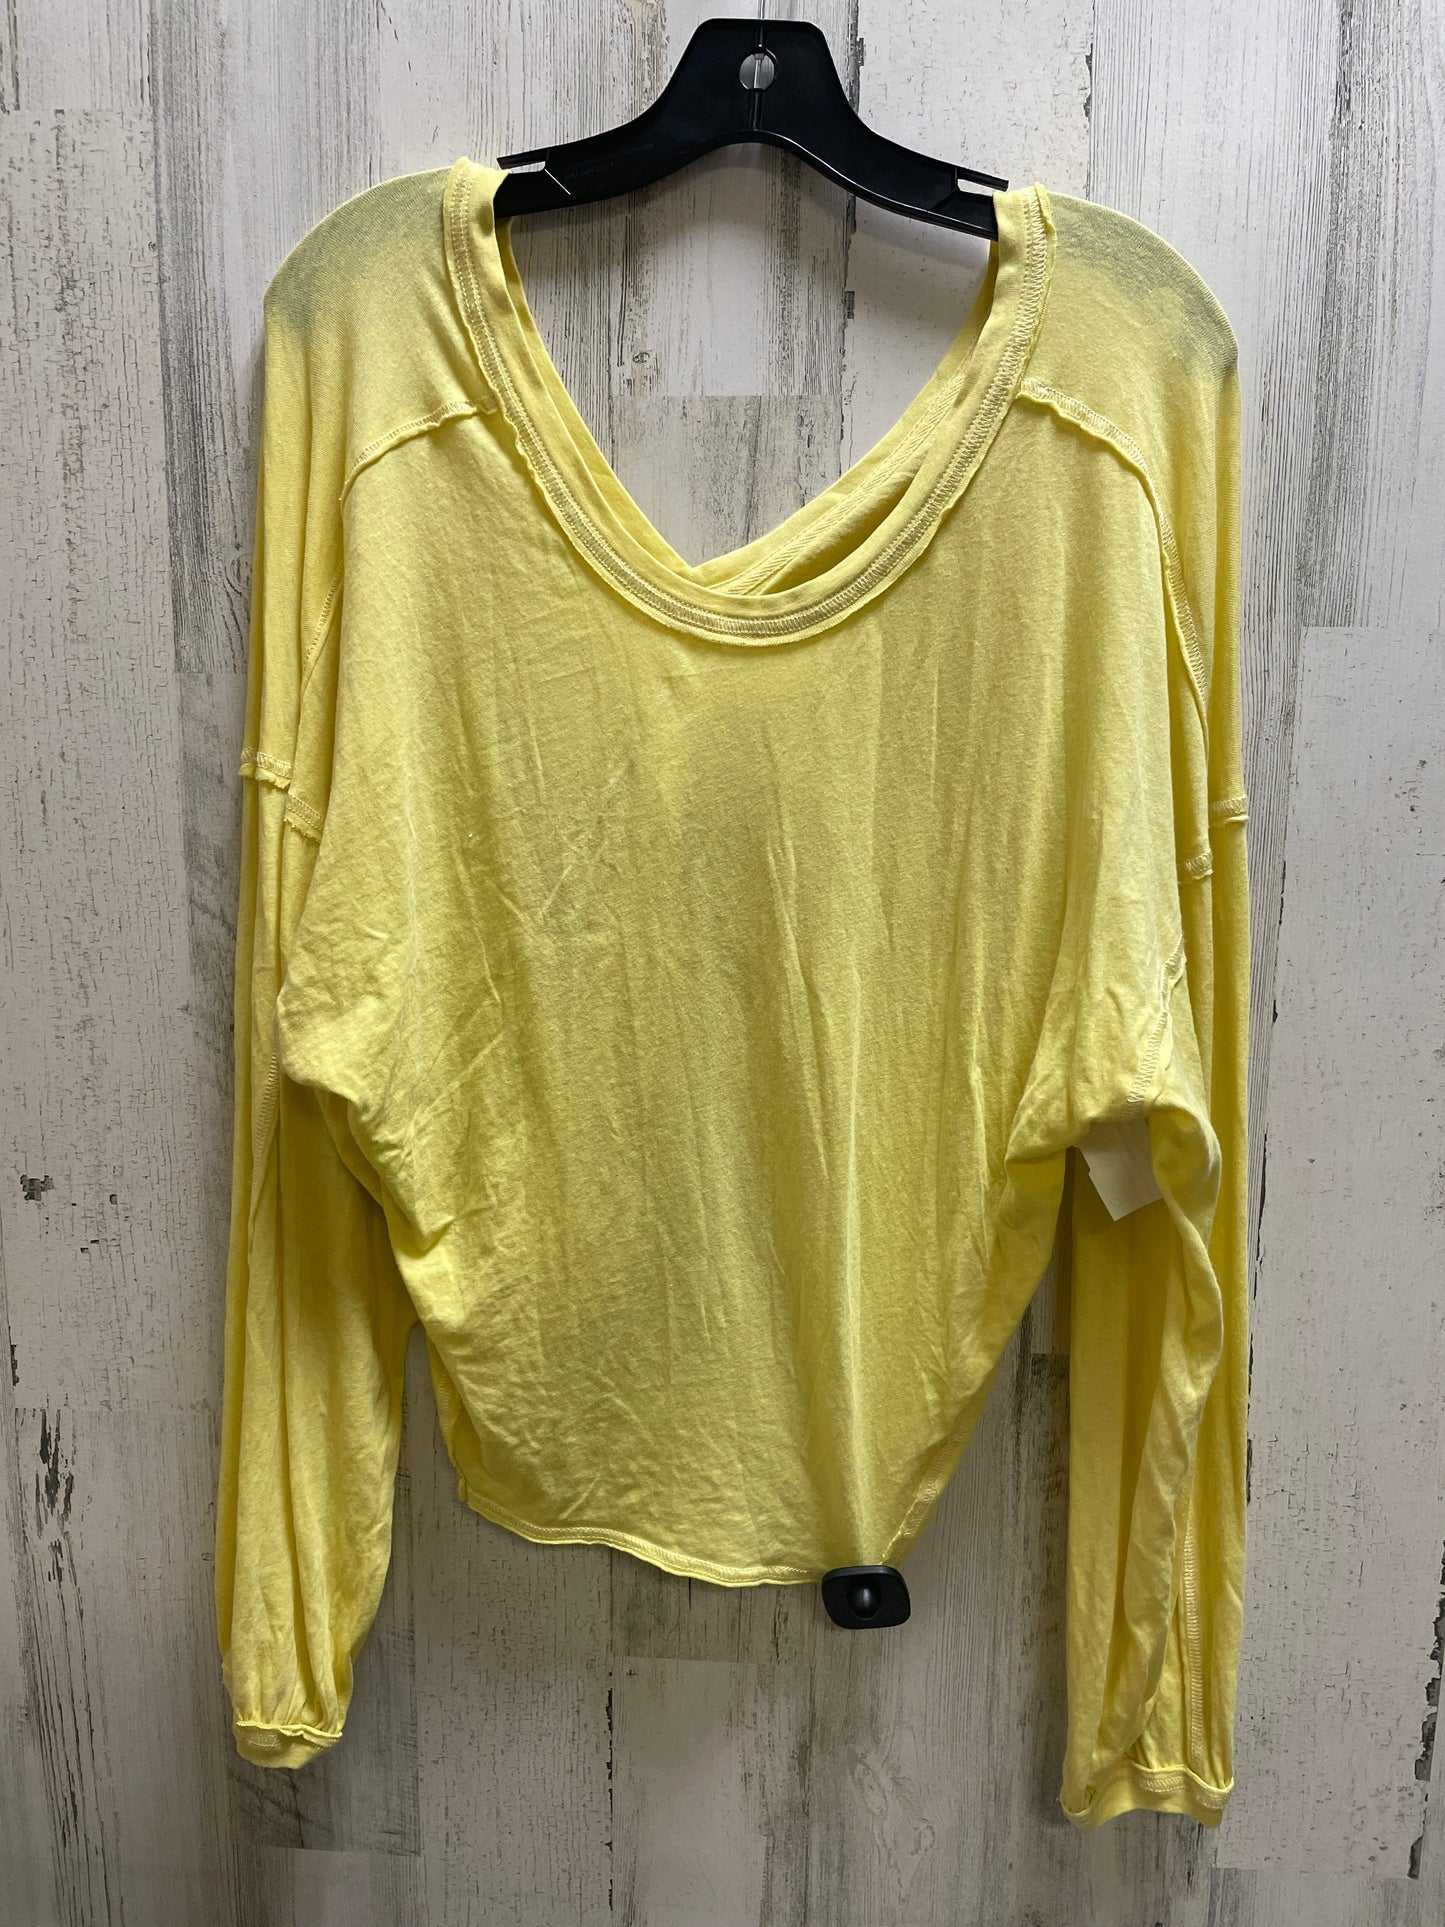 Yellow Top Long Sleeve Free People, Size S